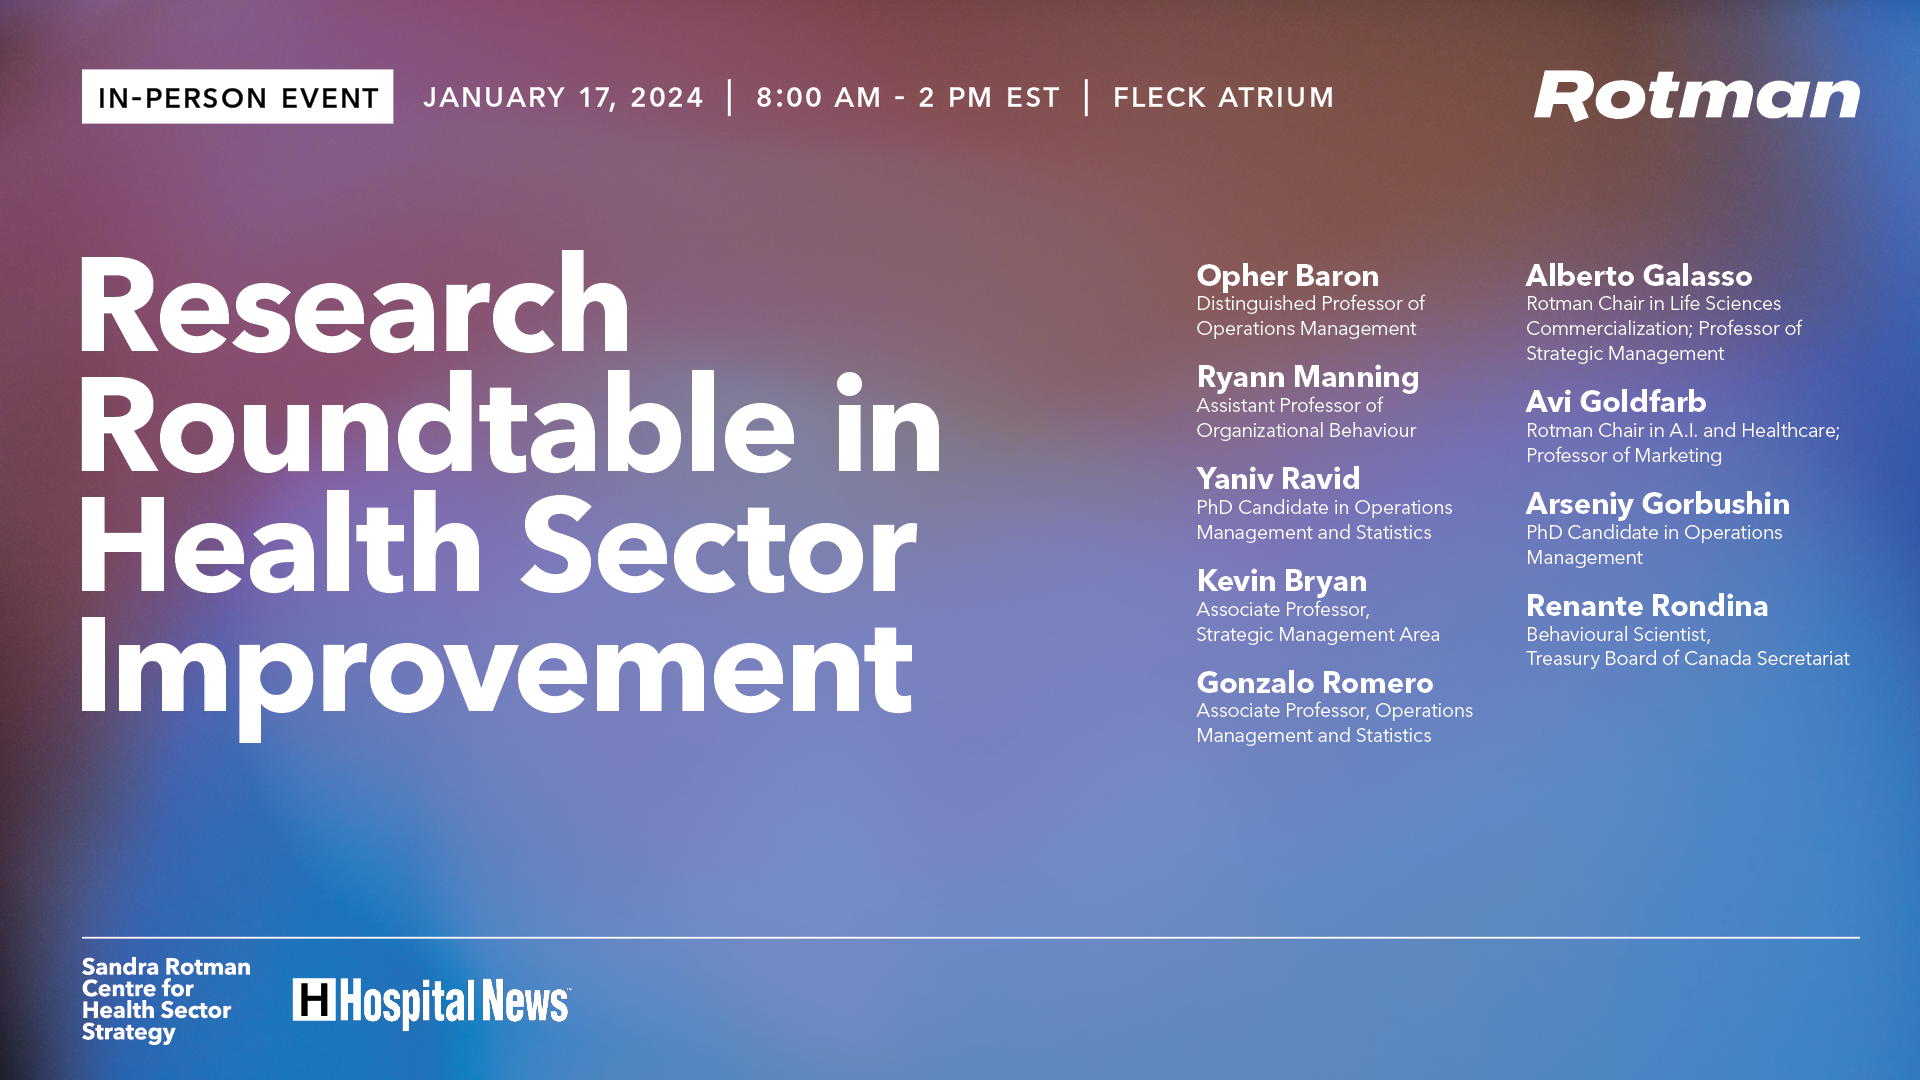 research roundtable in health sector improvement on january 17 - all day event